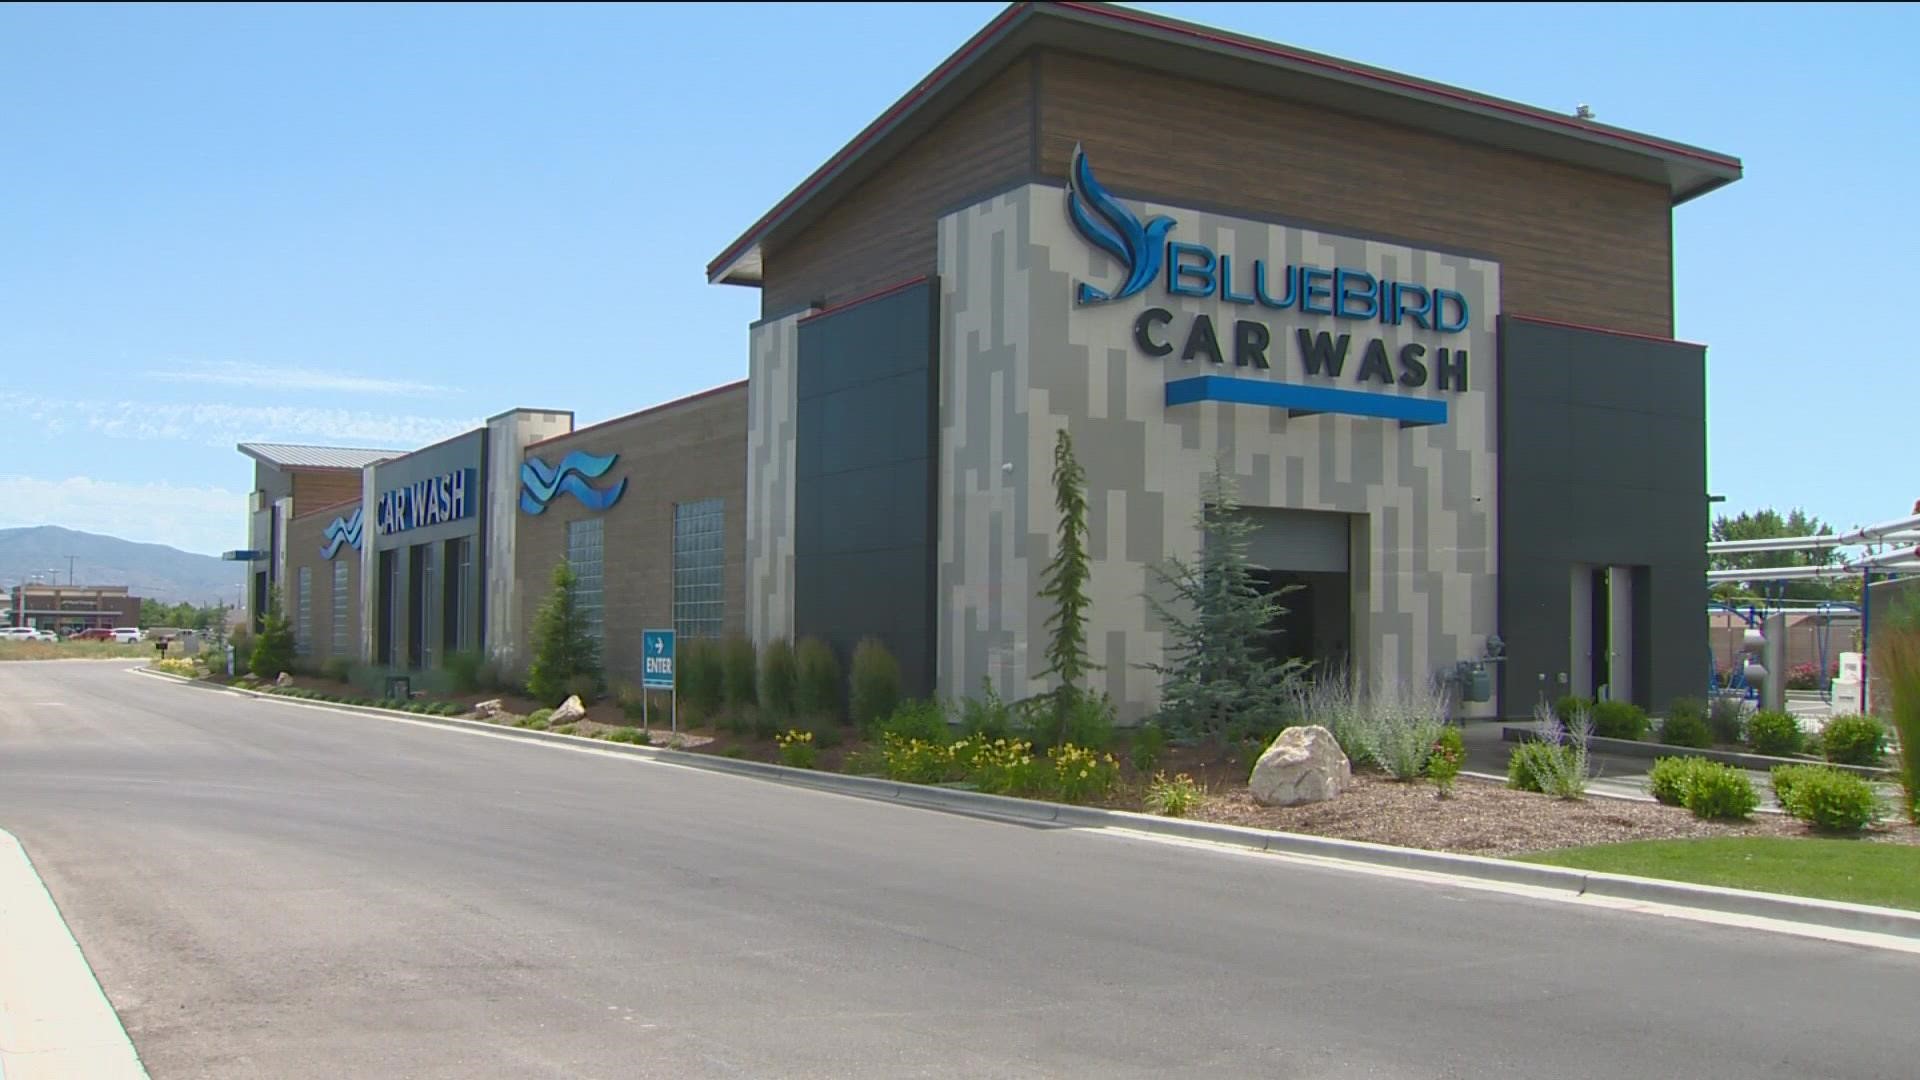 Bluebird Car Wash is giving people the opportunity to experience going through a car wash in a convertible. They invite the community to join on Friday.